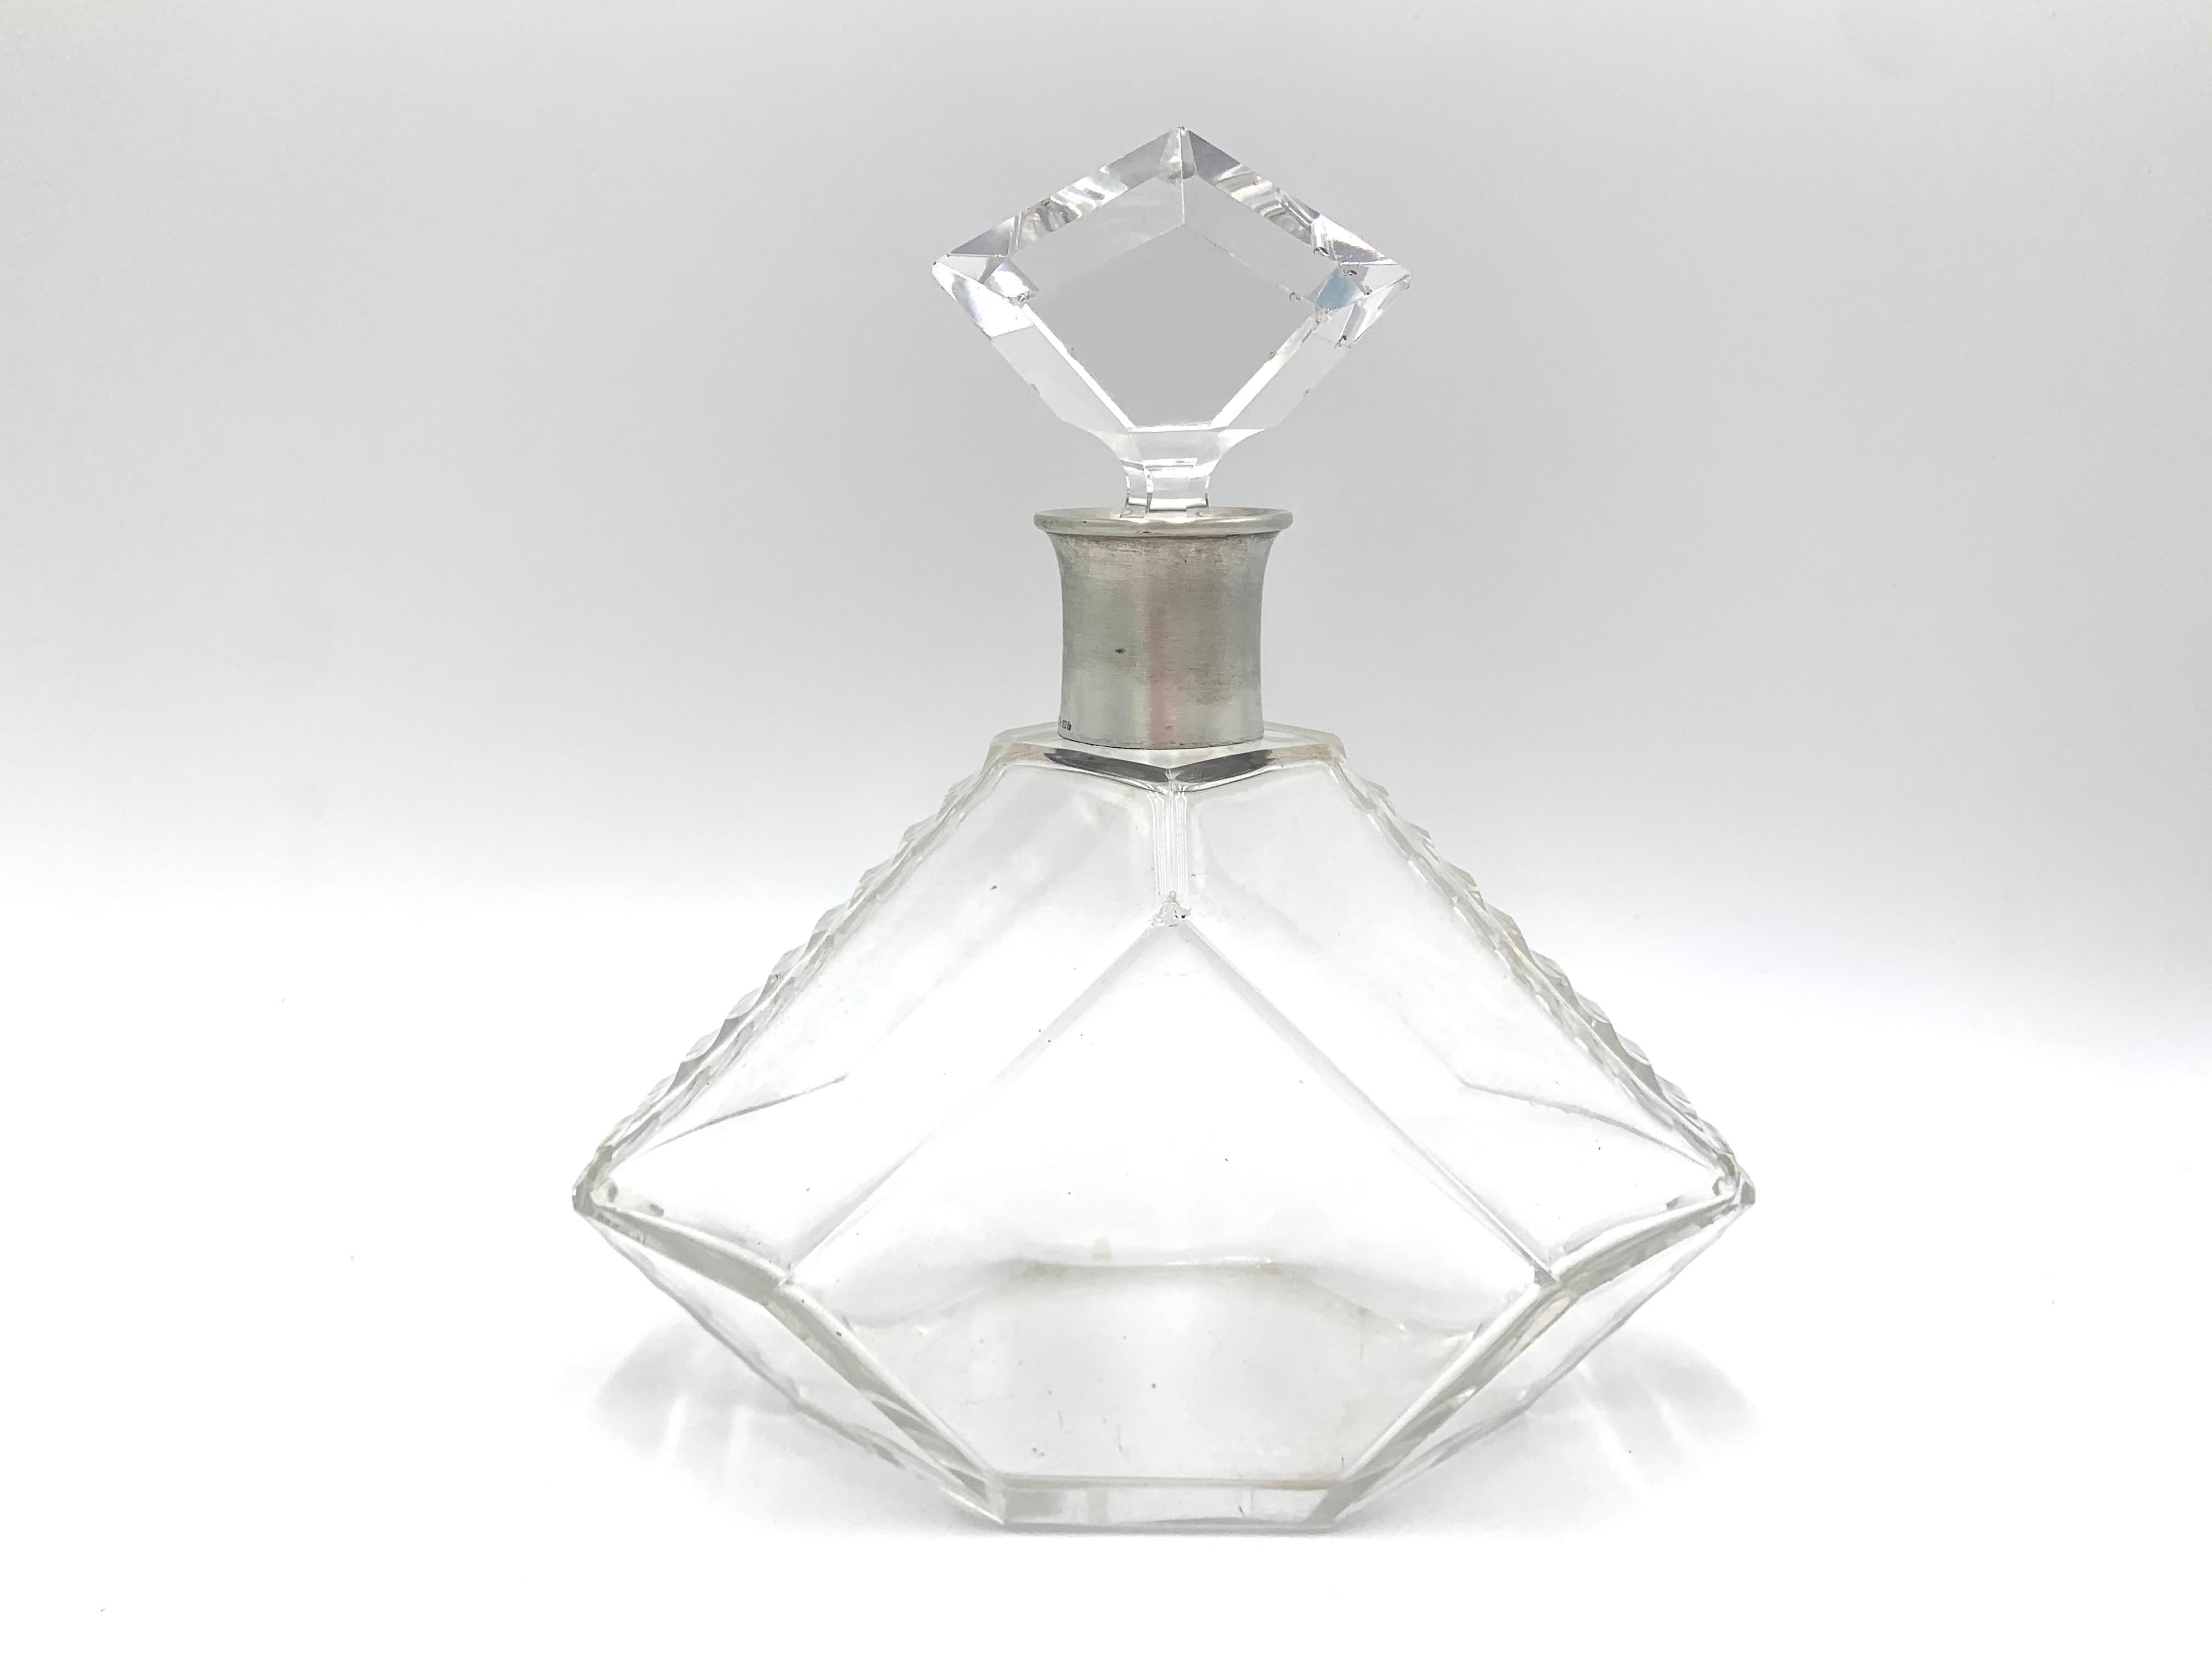 A crystal decanter with an 800 silver neck from the exquisite Julius Lemor silverware factory in Breslau.
The company operated in the years 1818-1945 and was run by four generations of the Lemor family.
The prestigious factory has been awarded